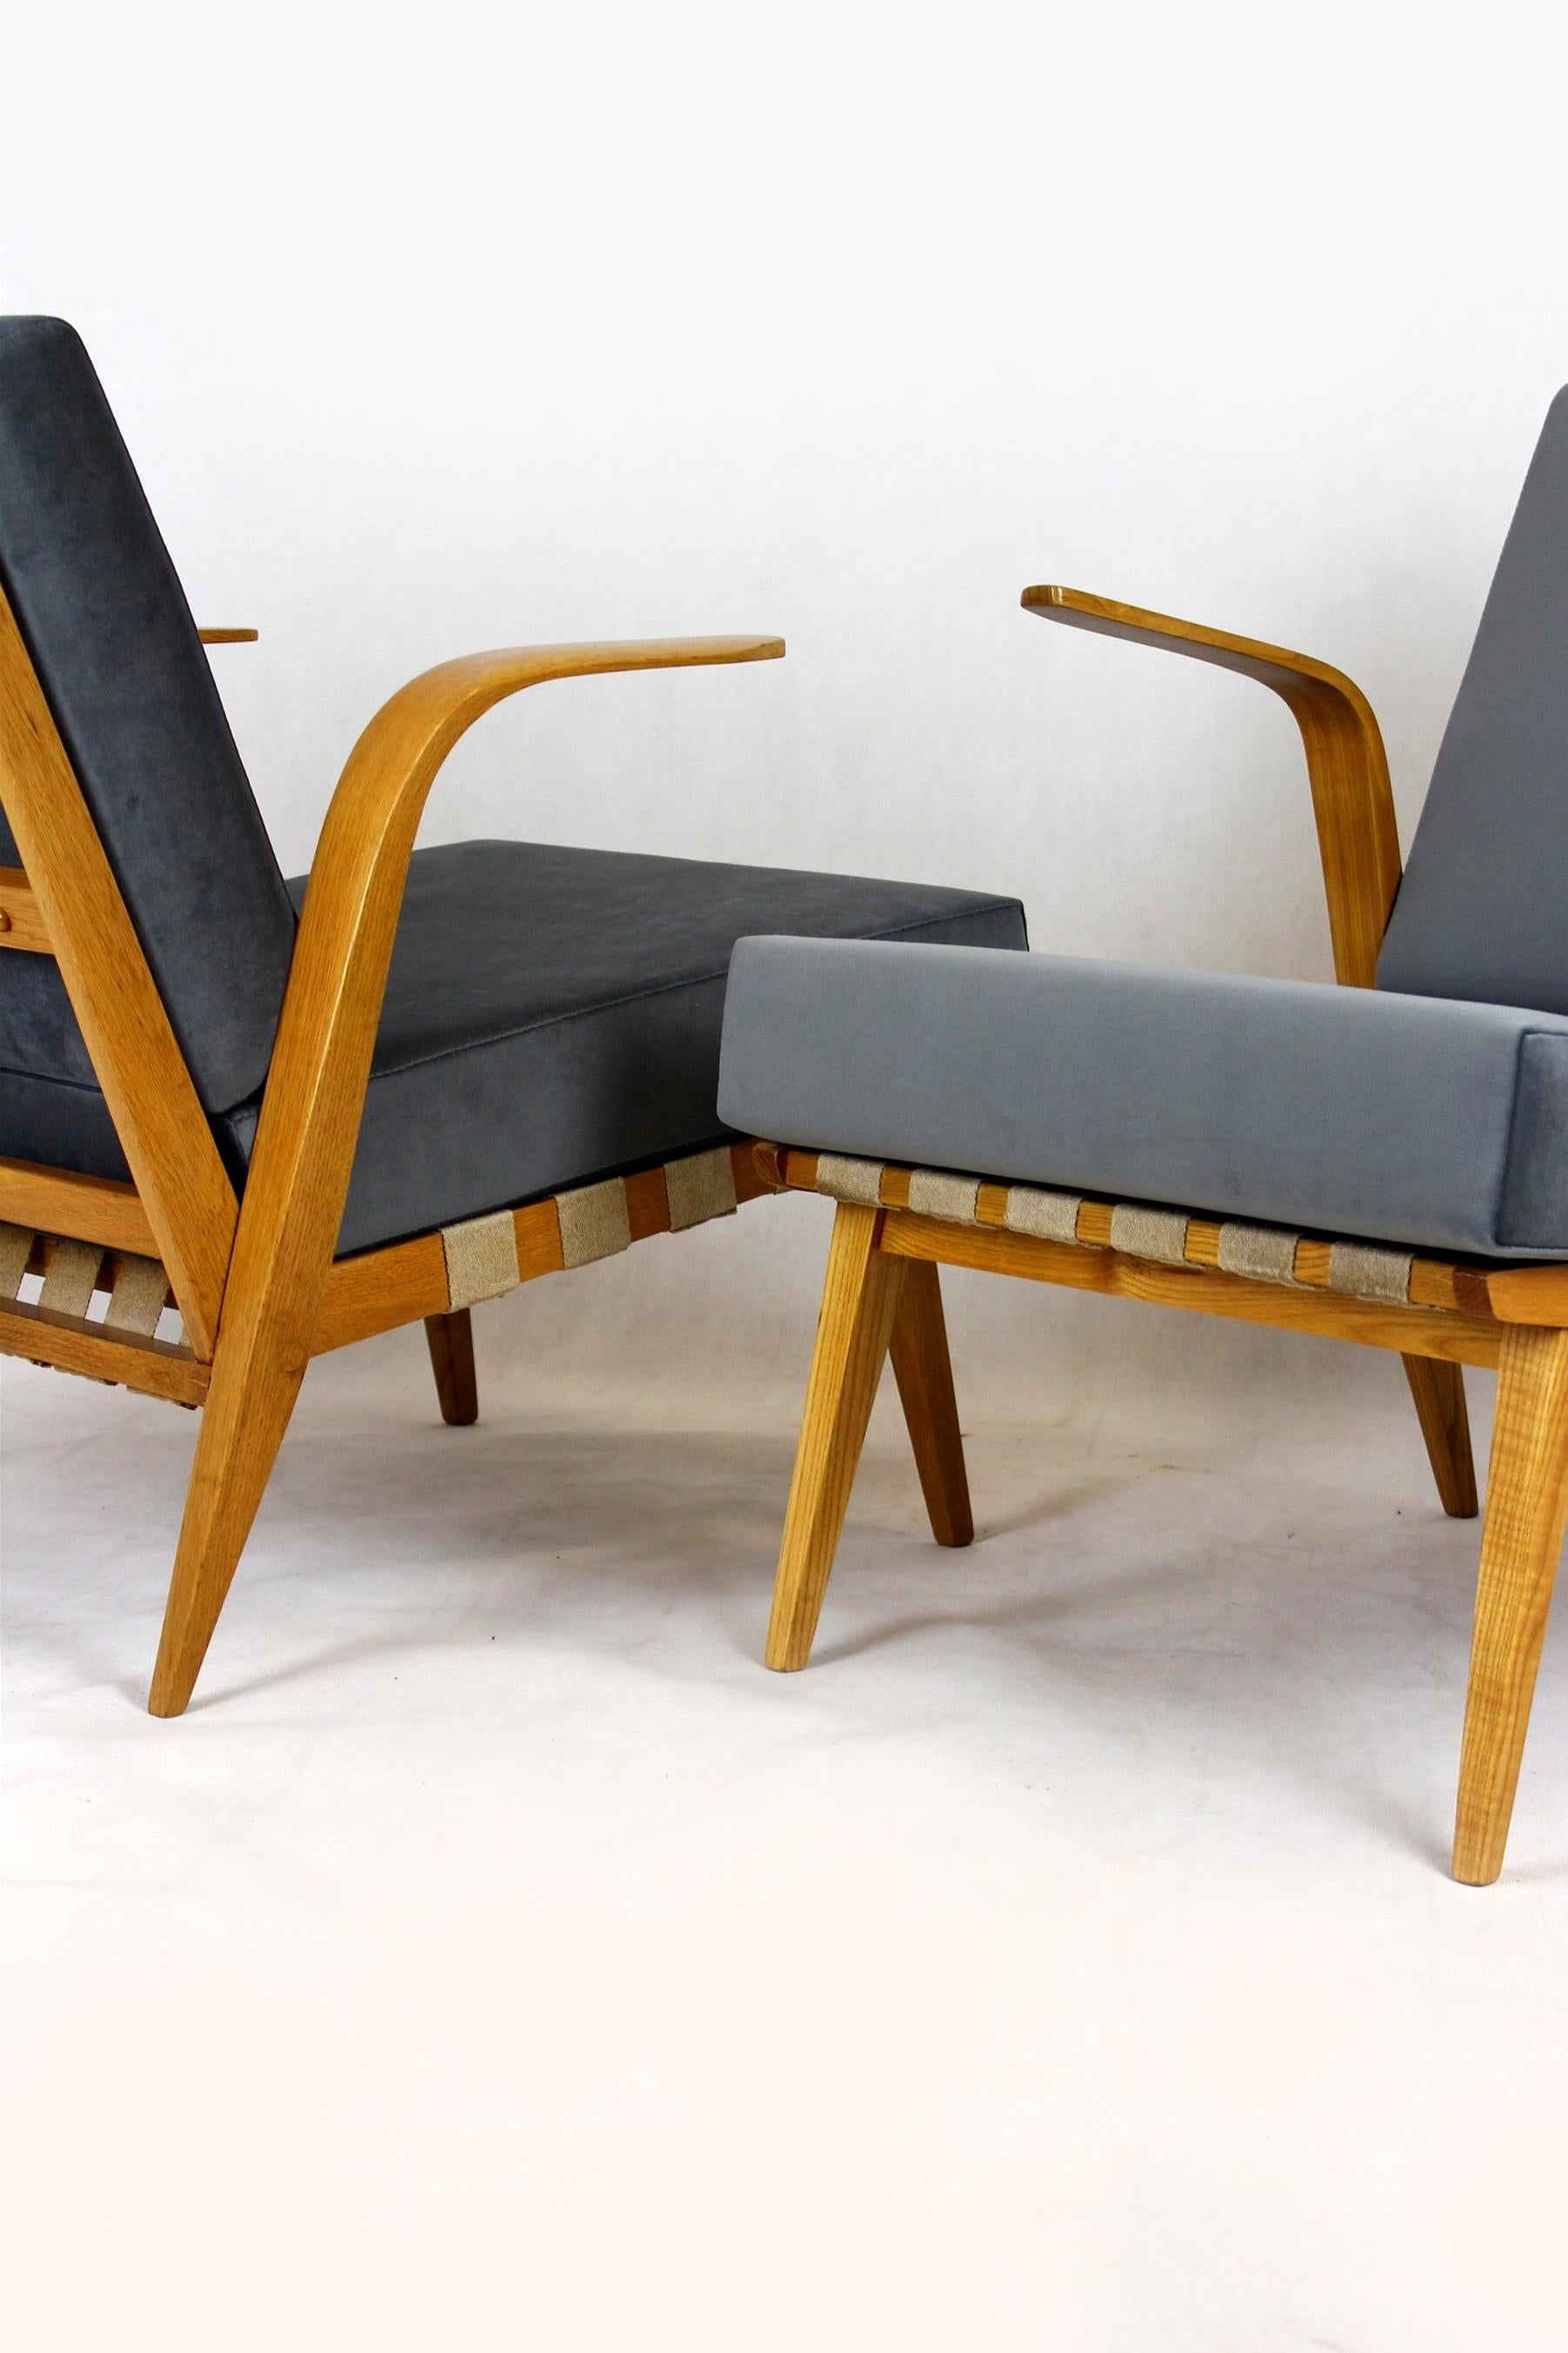 This pair of armchairs was made in 1962 by Drevozpracujici Druzstvo in Czechoslovakia.
The armrests are made of bent wood.
The armchairs have been restored, new mattresses, satin lacquered wood.
The armchairs are slightly different from each